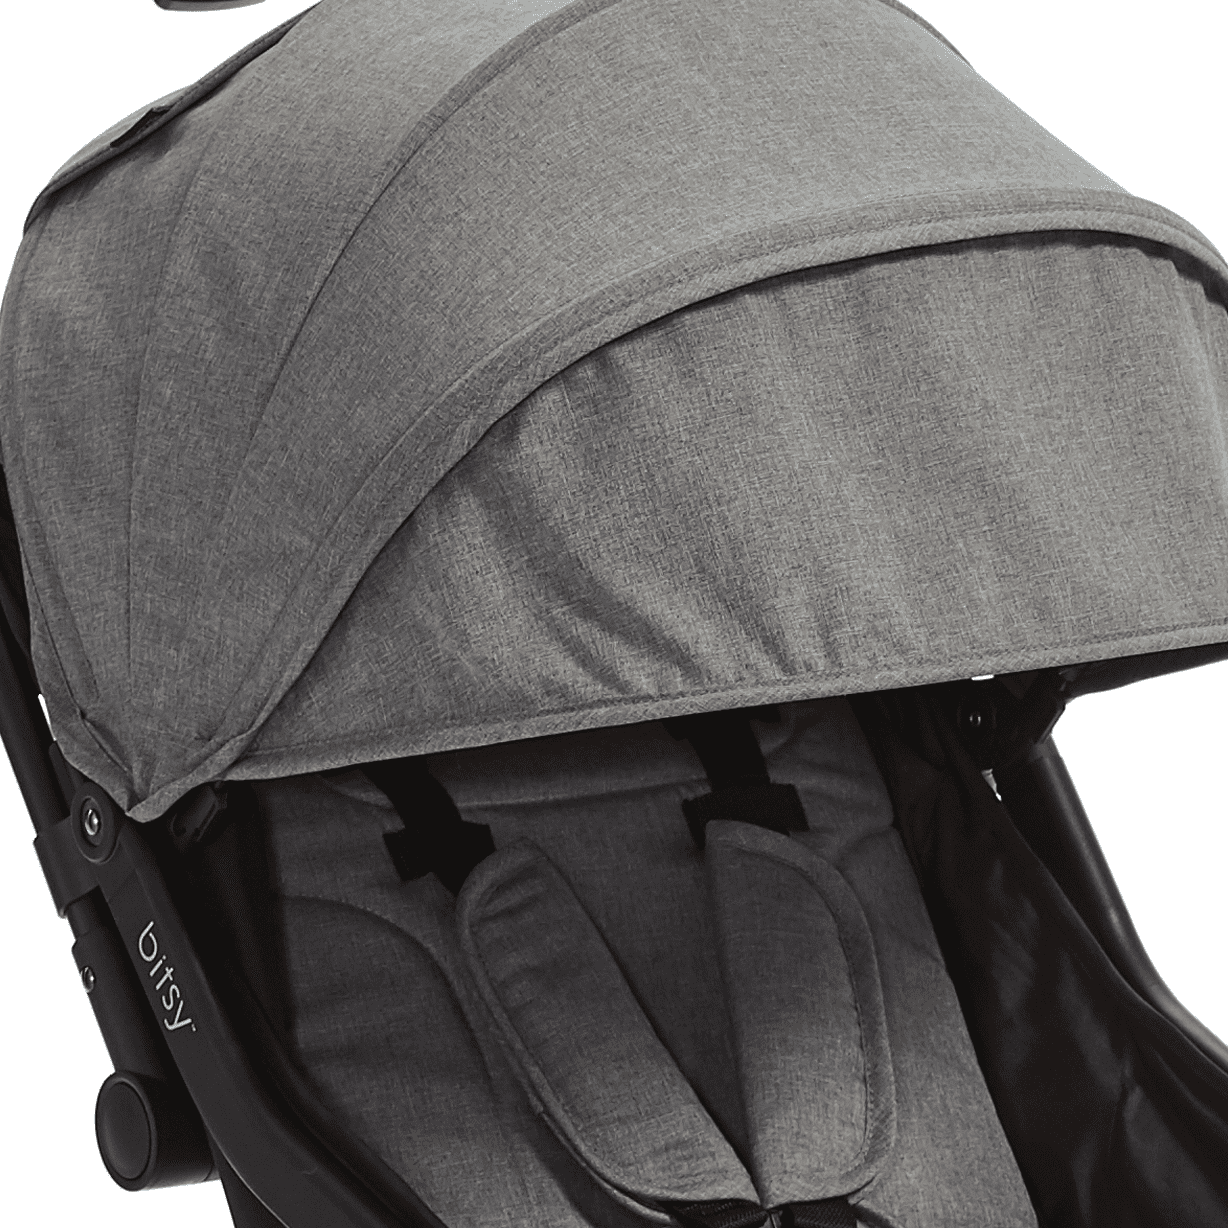 contours bitsy compact fold stroller review